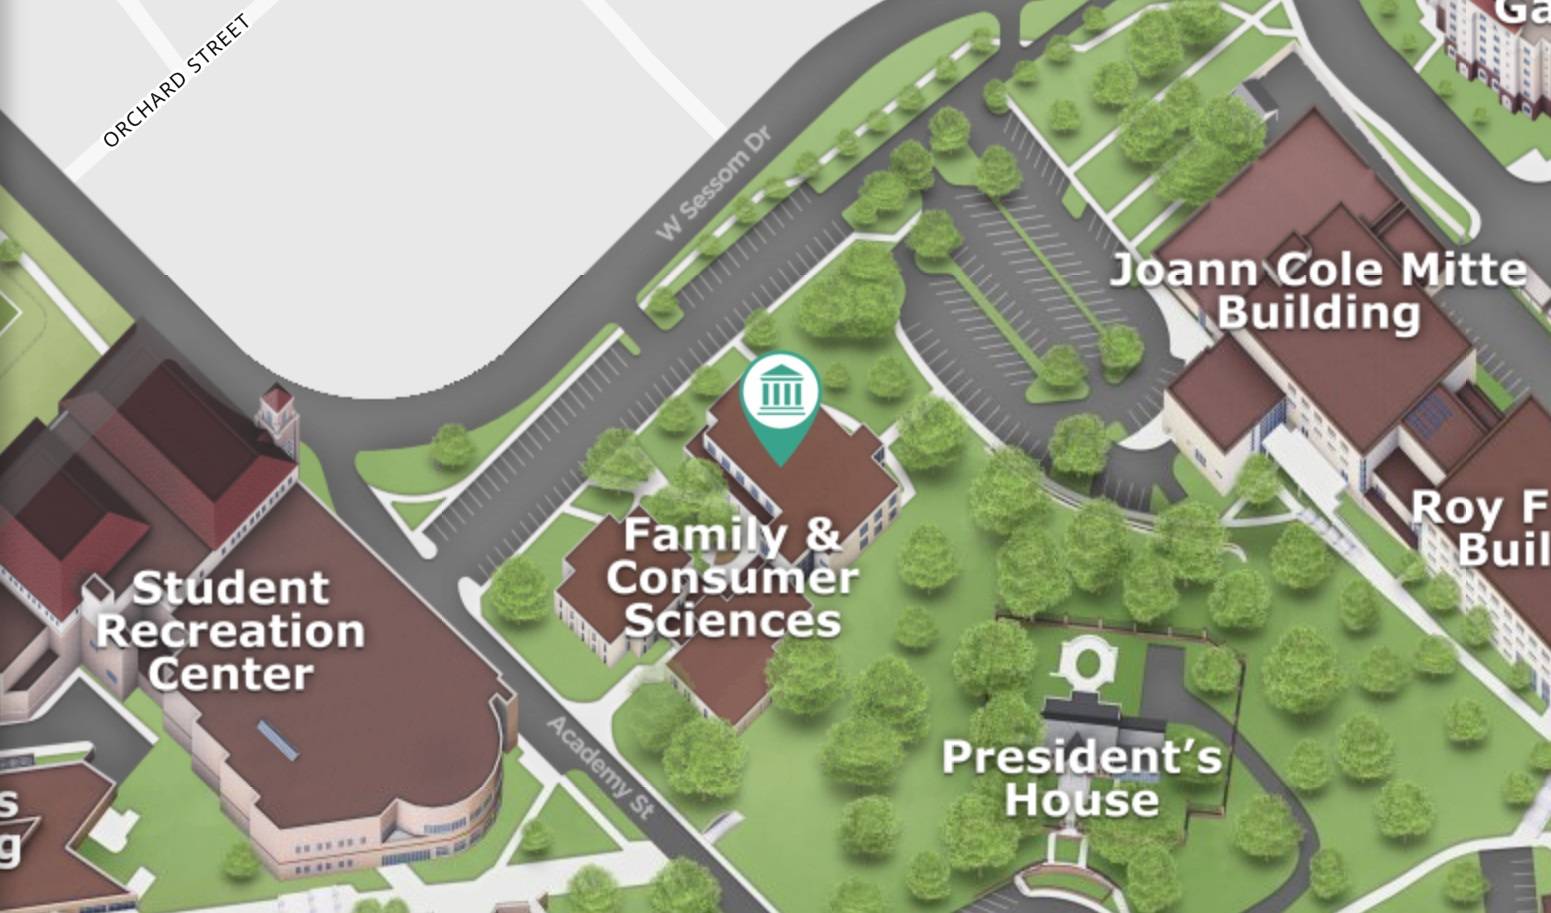 a map of the Texas State University campus showing the Family and Consumer Sciences building between the Student Recreation Center, the Joann Cole Mitte building, and the president's house